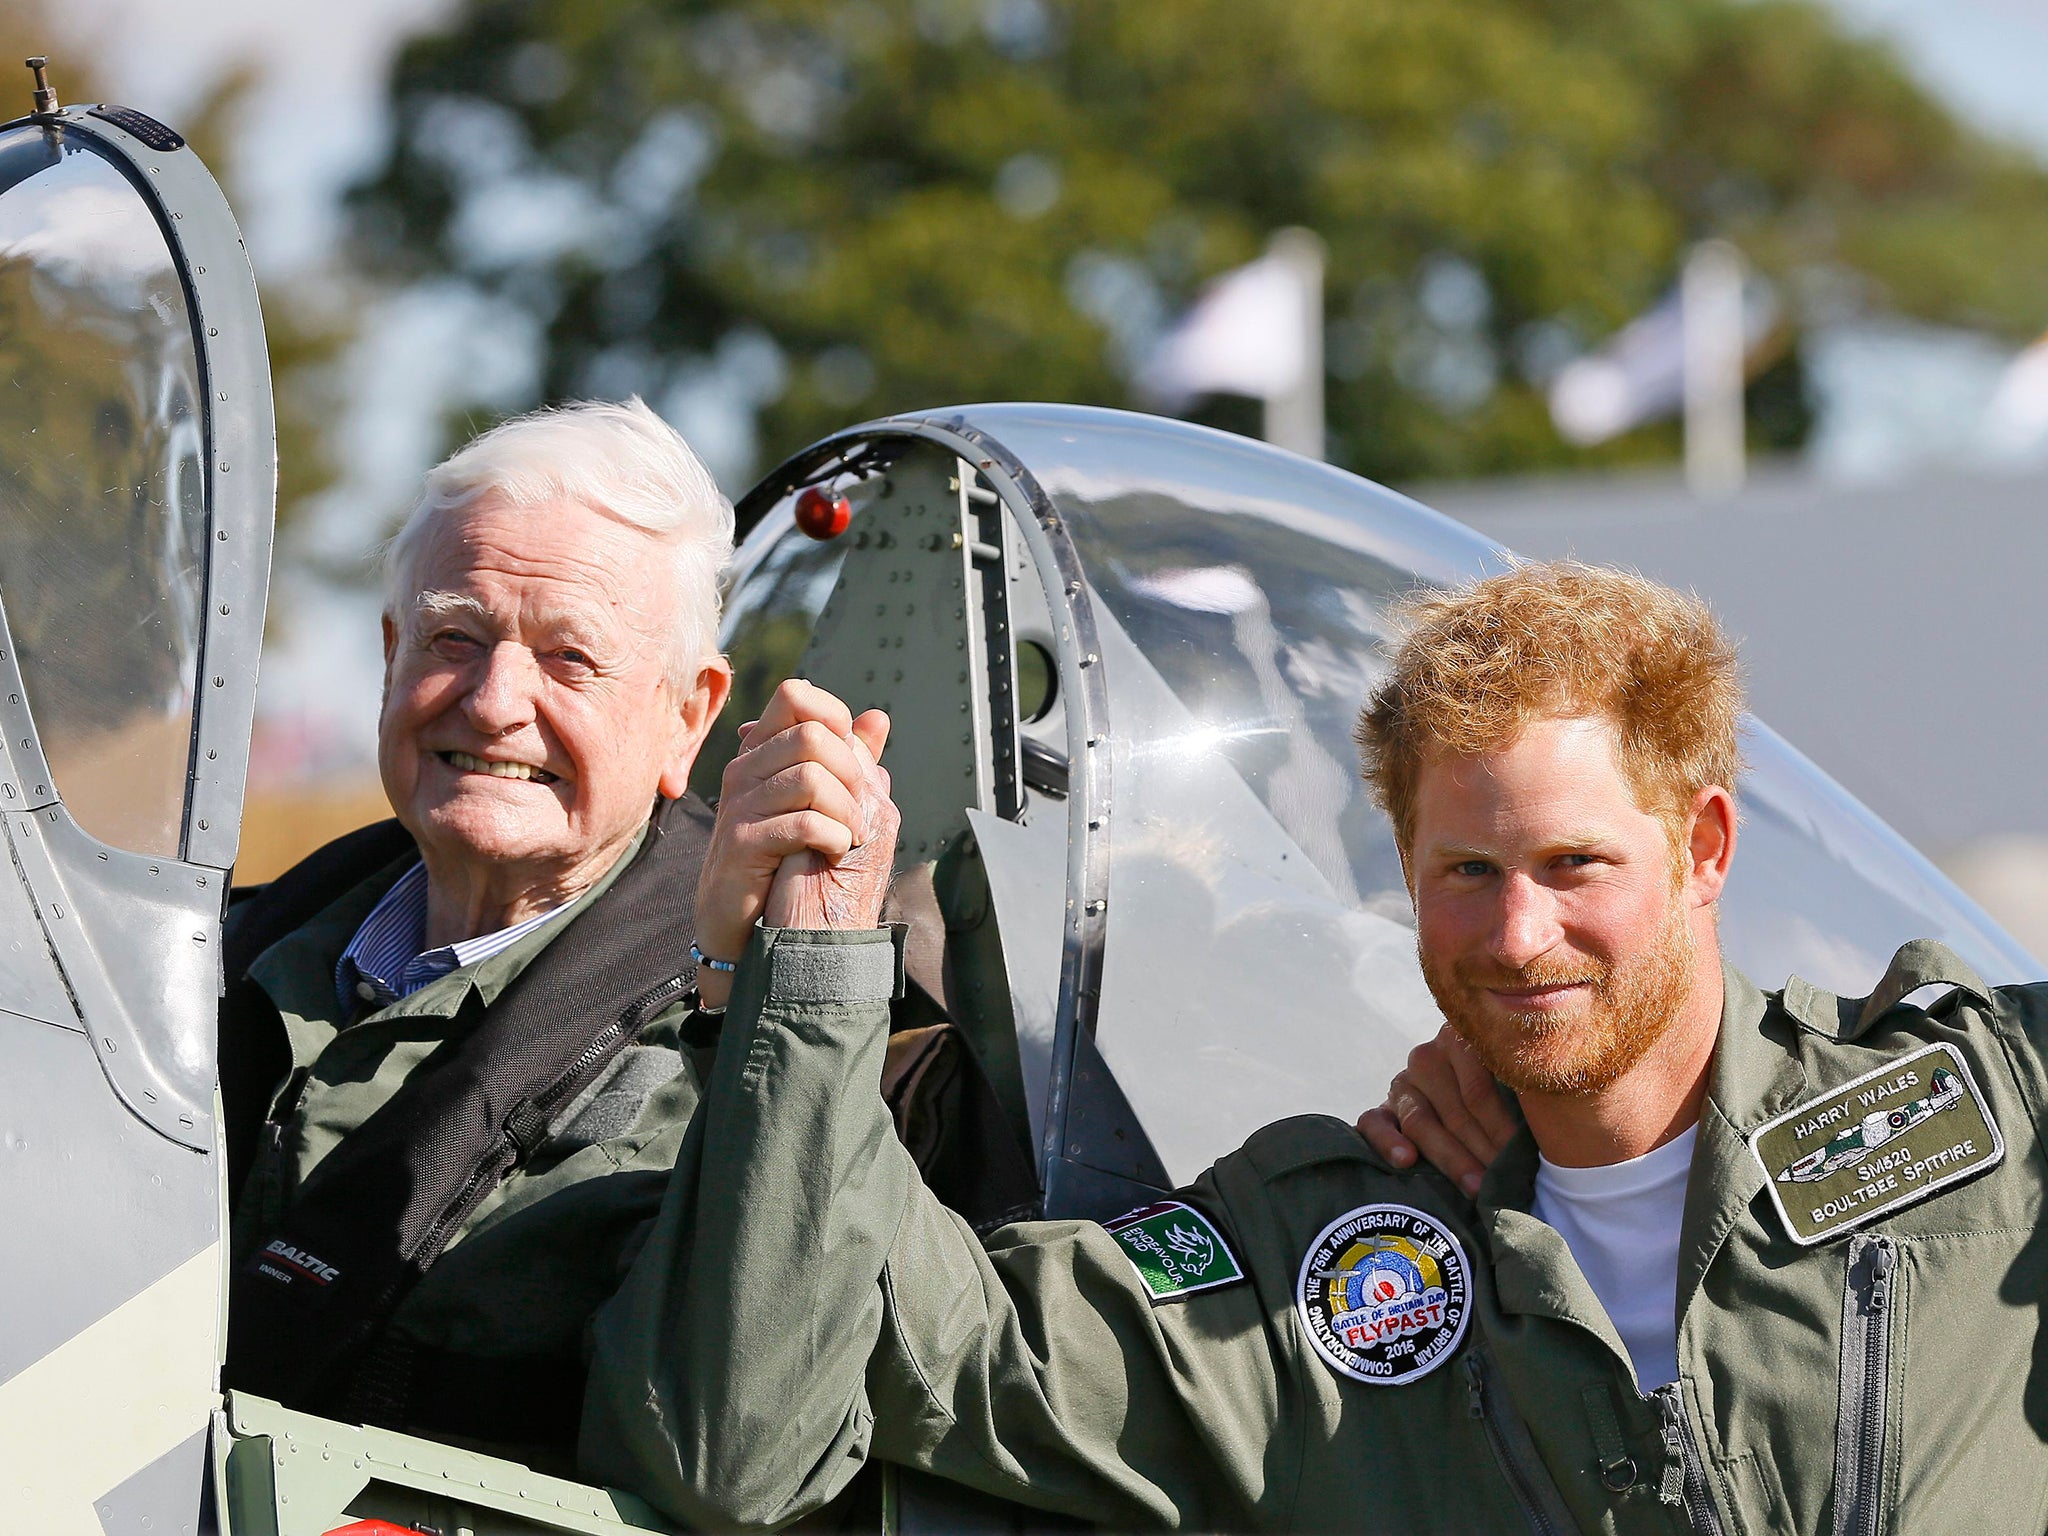 Prince Harry with Tom Neil after the 95-year-old ex-wing commander and Battle of Britain Hurricane and Spitfire pilot took part in the Battle of Britain Flypast to mark the 75th anniversary of victory in the Battle of Britain at Goodwood Aerodrome in West